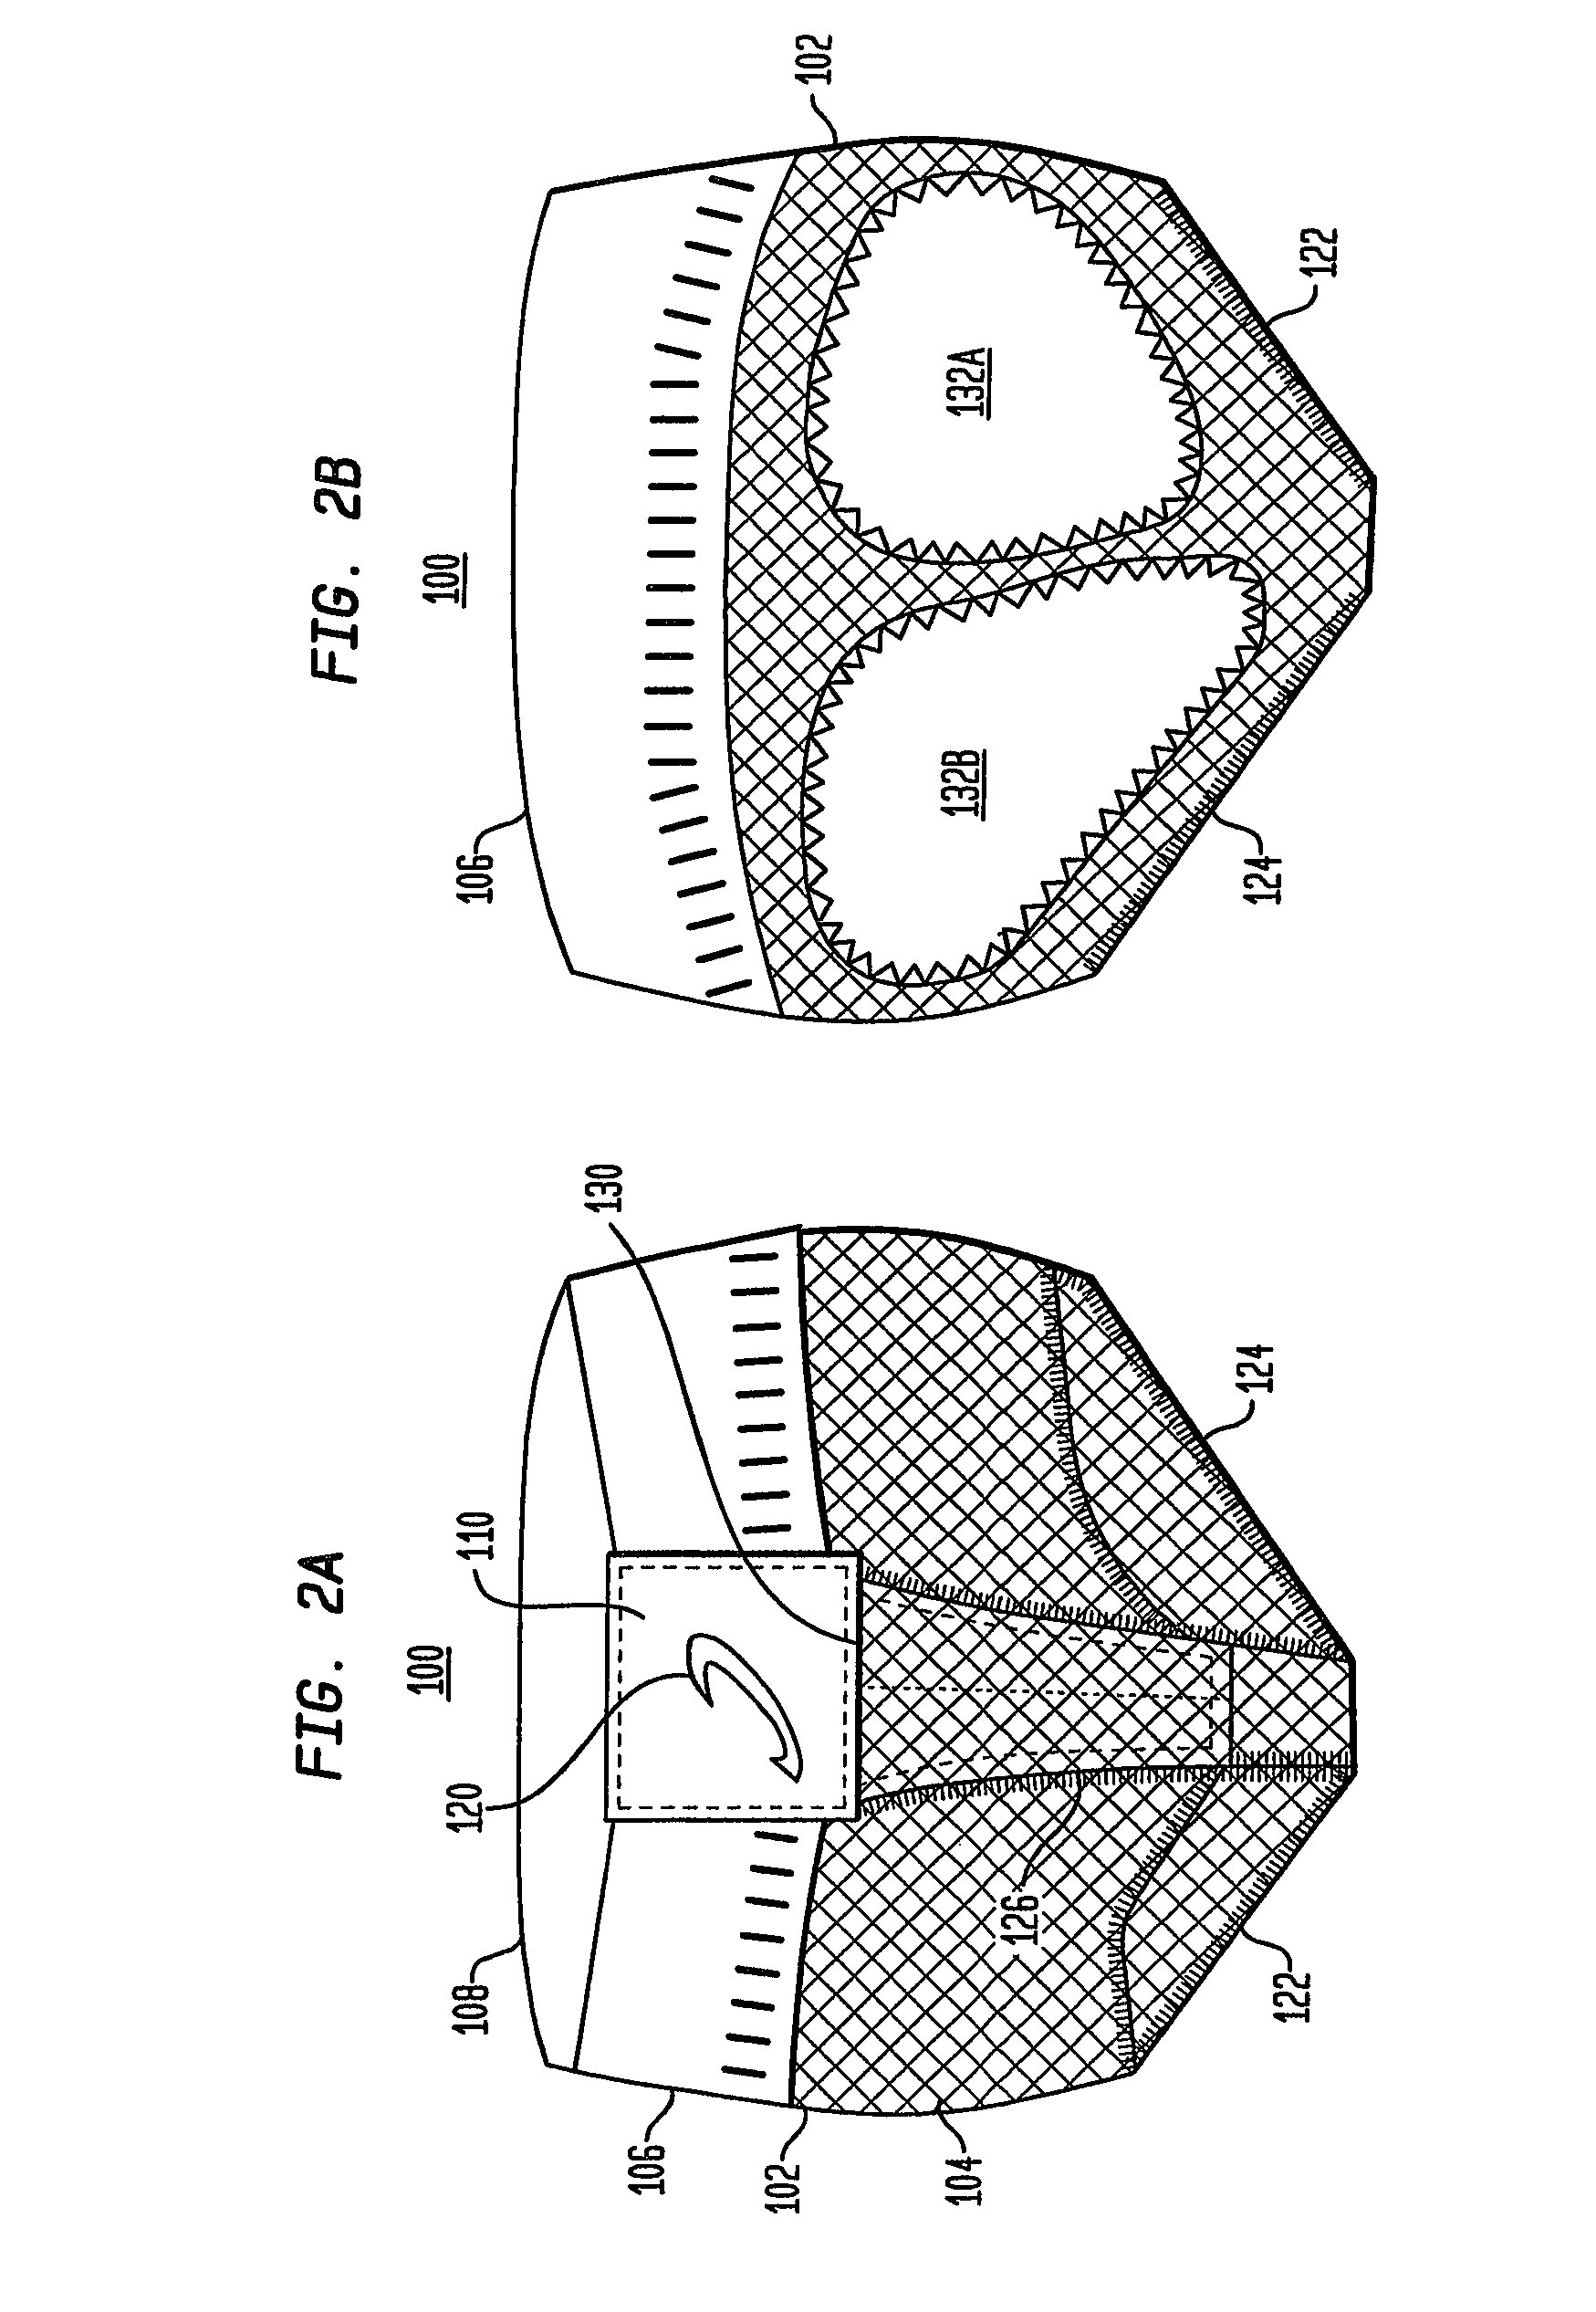 Protective foot covering